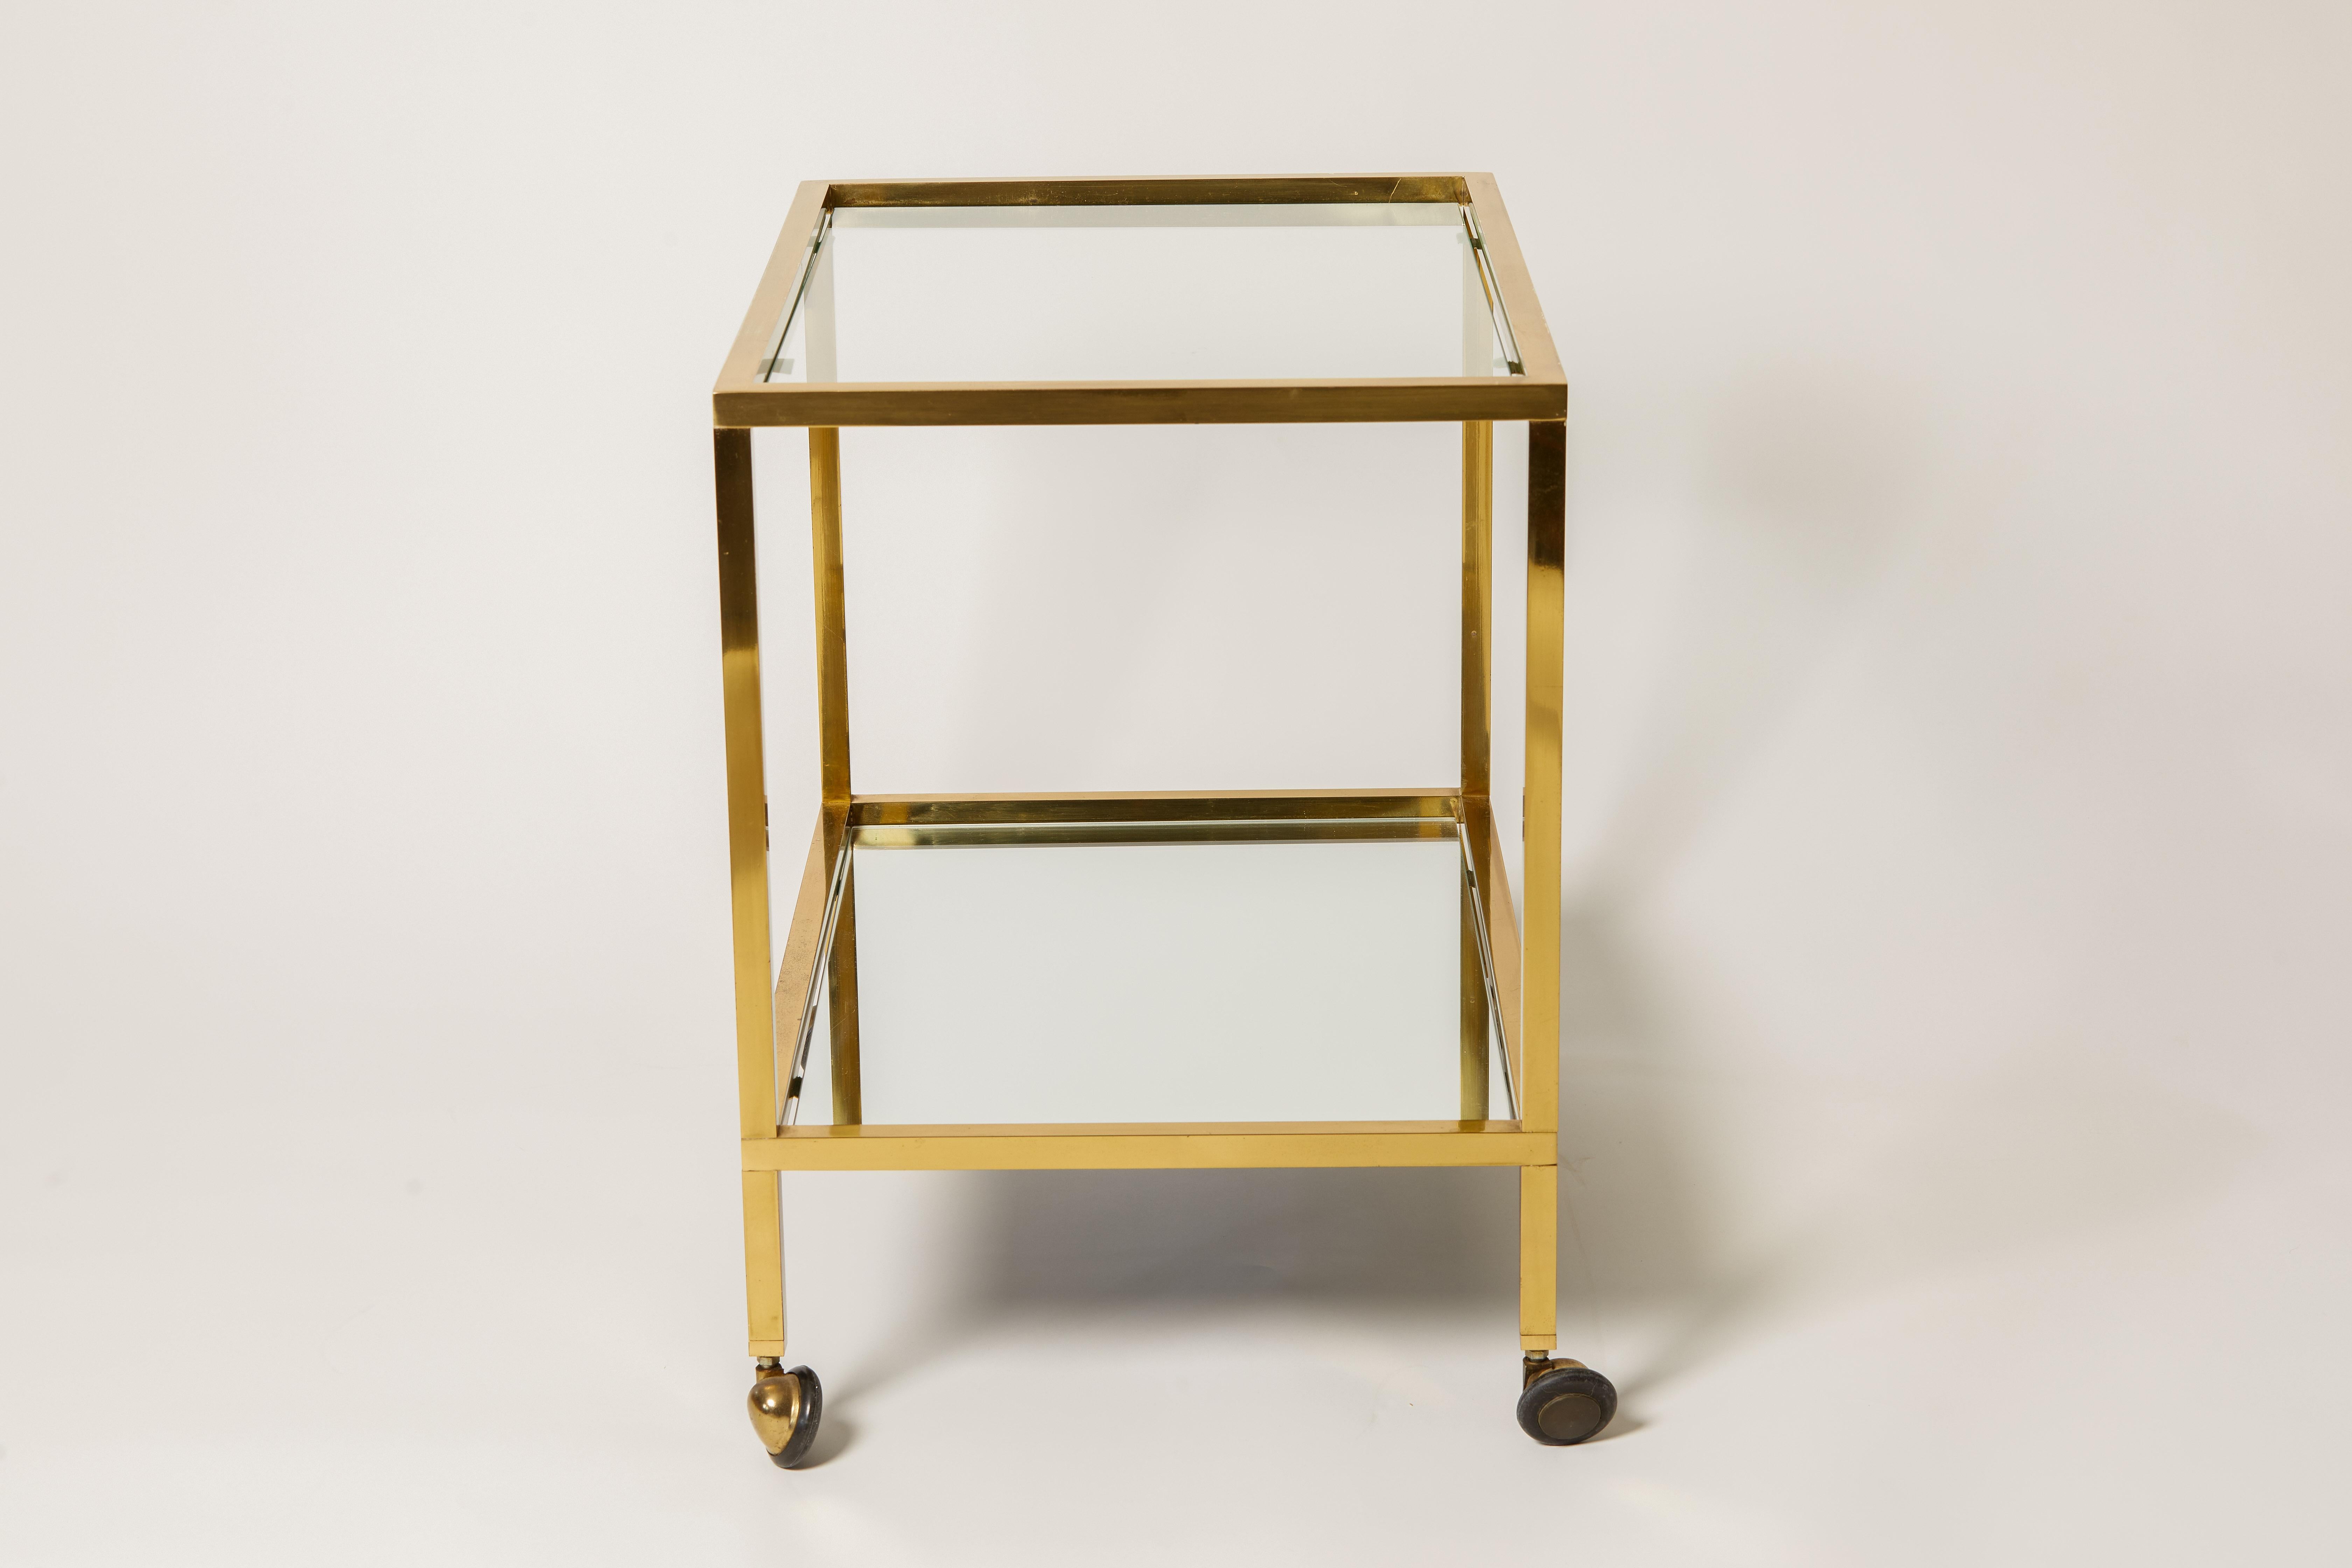 1960s Italian Brass, Glass & Mirror Bar Cart. Top shelf is glass and bottom shelf is mirror. The wheels on cart are not removable.